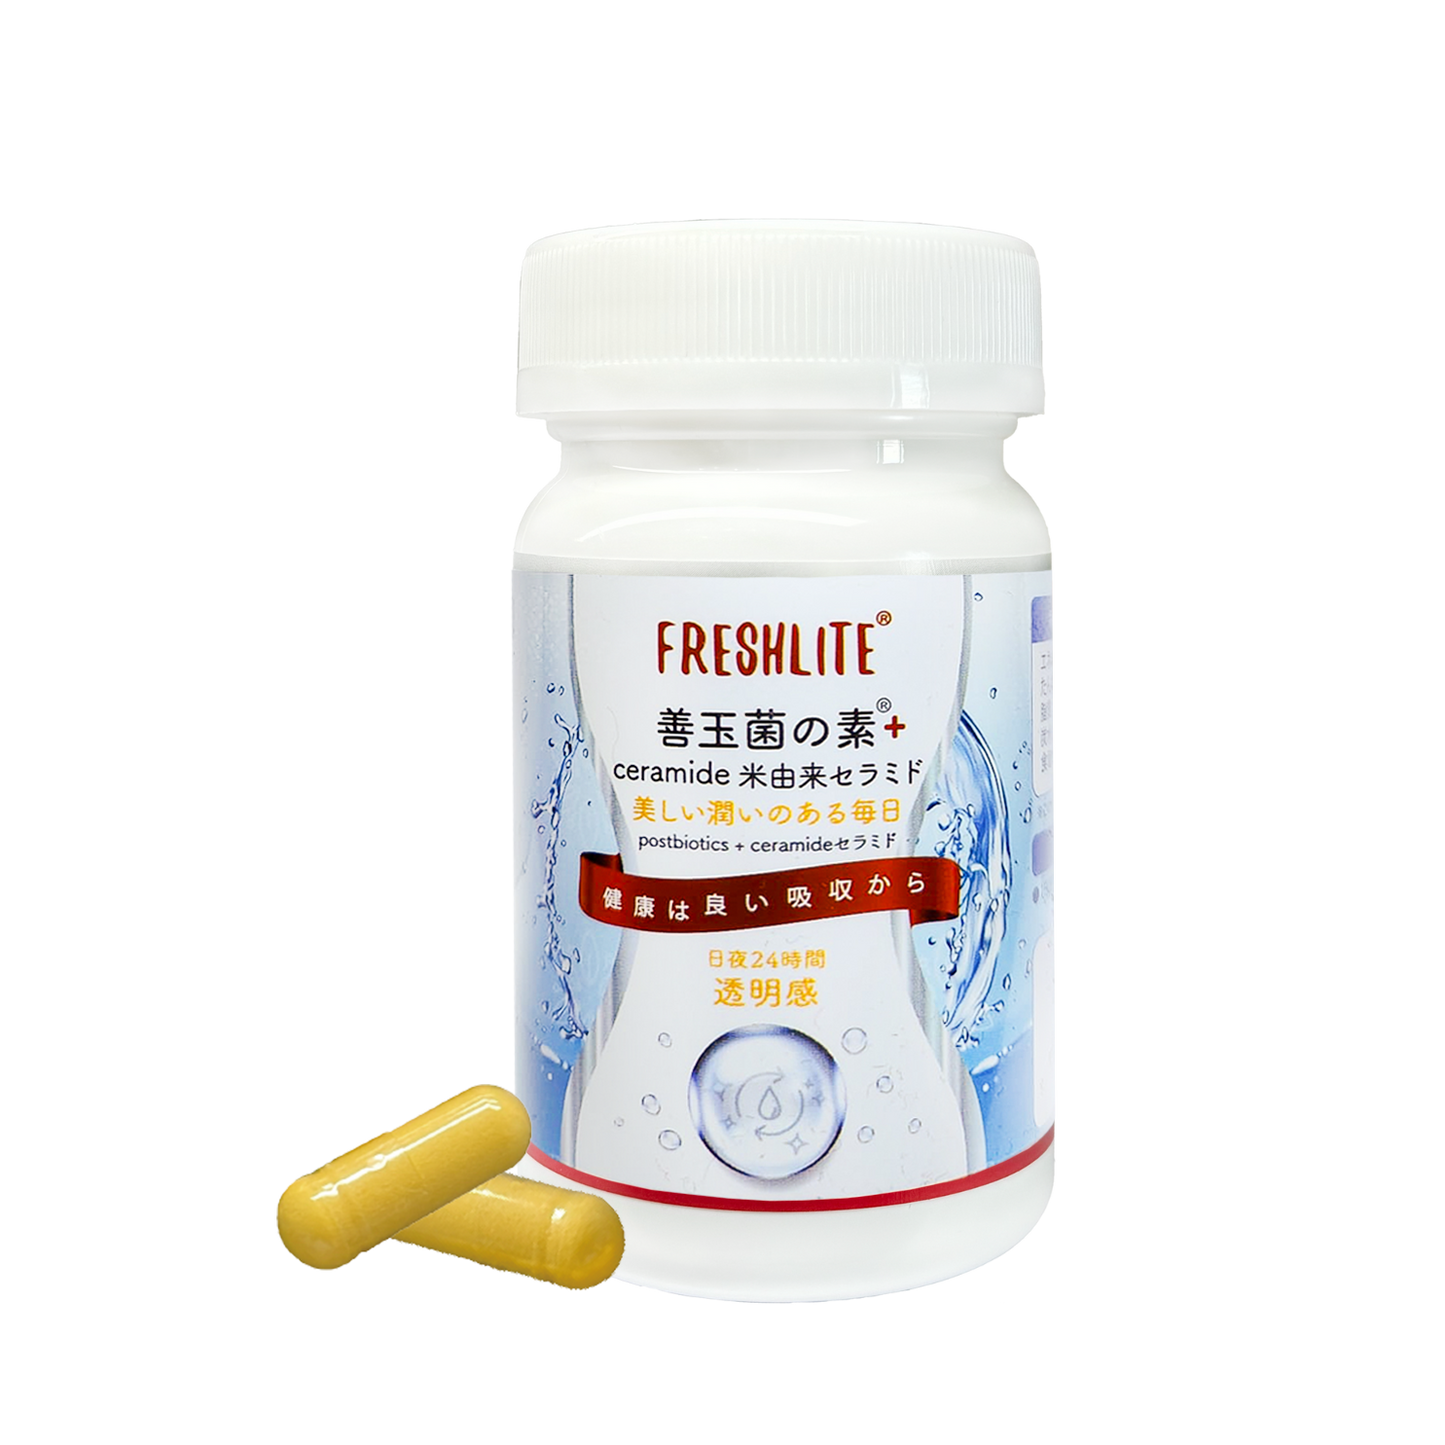 Postbiotics+Nattokinase 2500FU; Help with blood Clot, Improving blood flow, Help with blood pressure, Help with blood sugar; 60 capsules for 30 days; taking 2 capsules with warm water per day